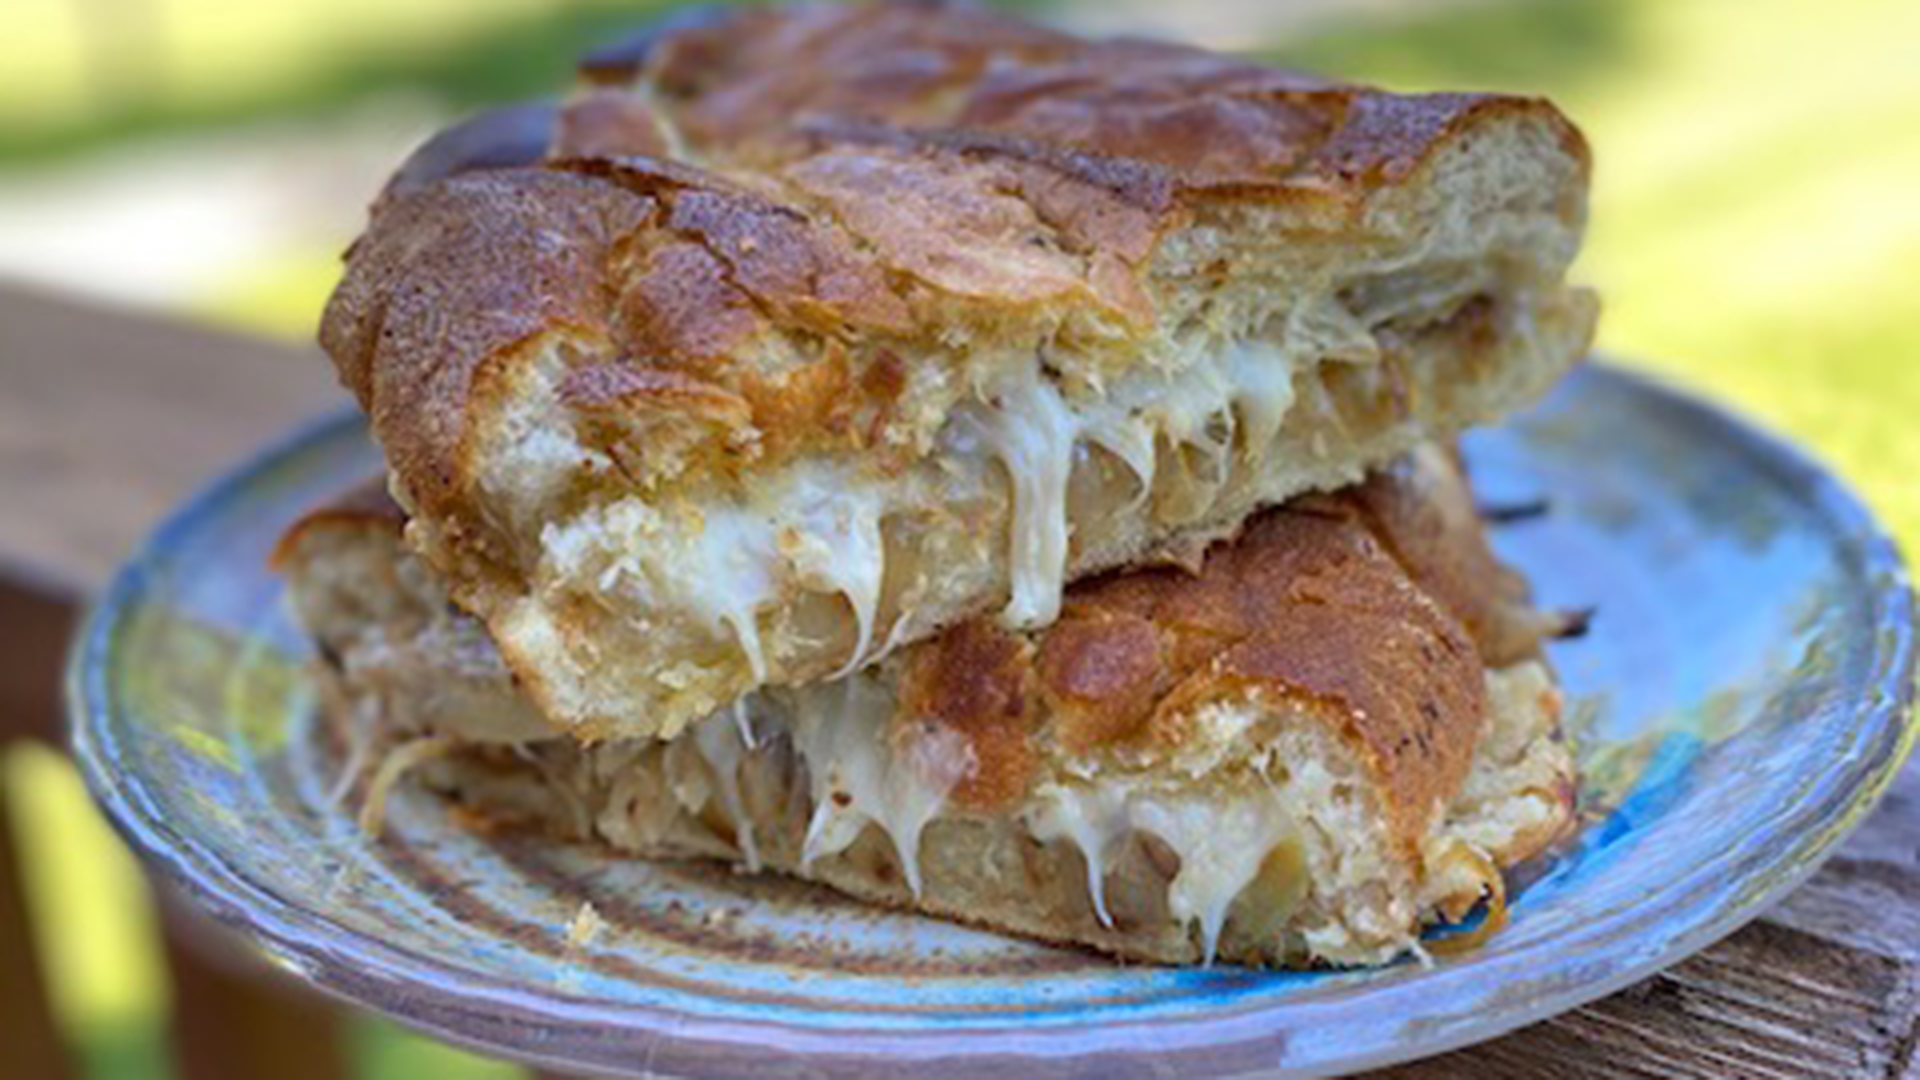 BBQ’d French onion grilled cheese